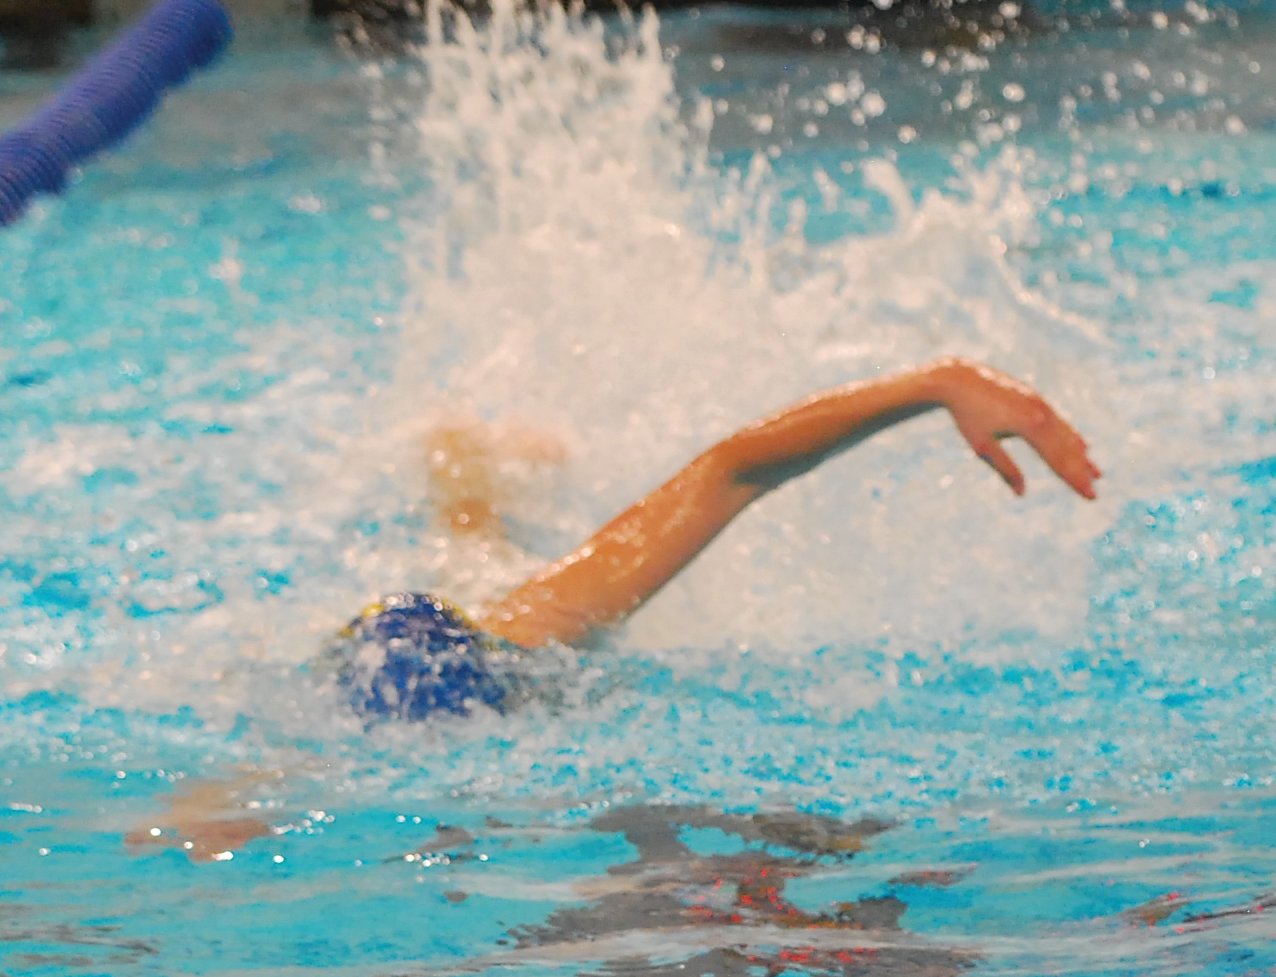 Crawfordsville's Marshall Horton took home wins in the 100 freestyle and the 100 breaststroke at the county meet on Tuesday.